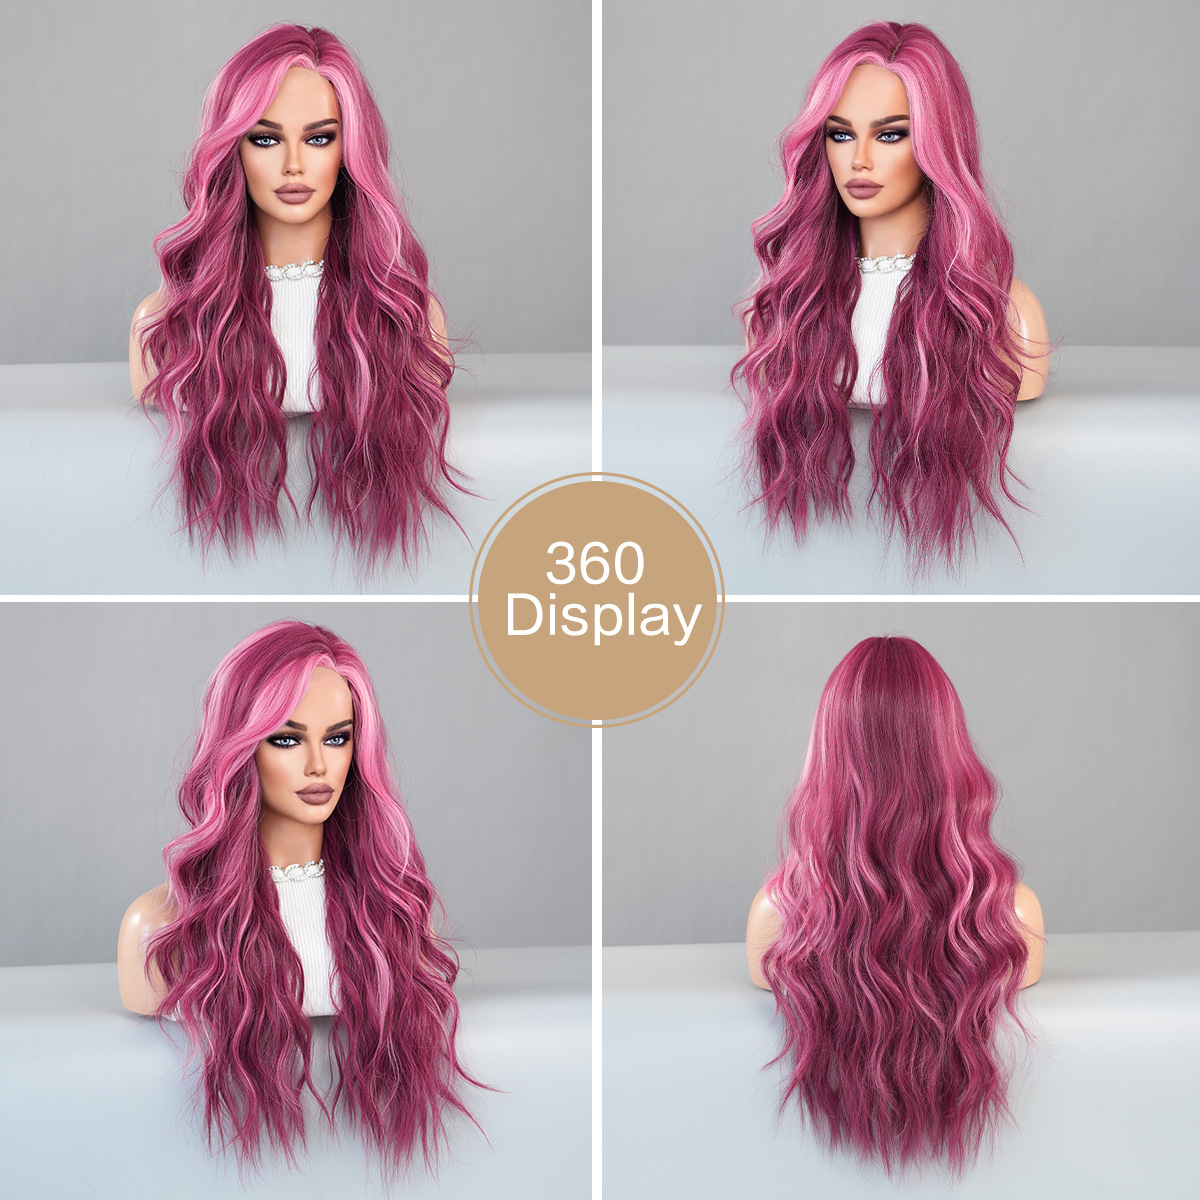 Stylish synthetic wig with small lace, featuring starry sky purple highlights and long wavy curly hair